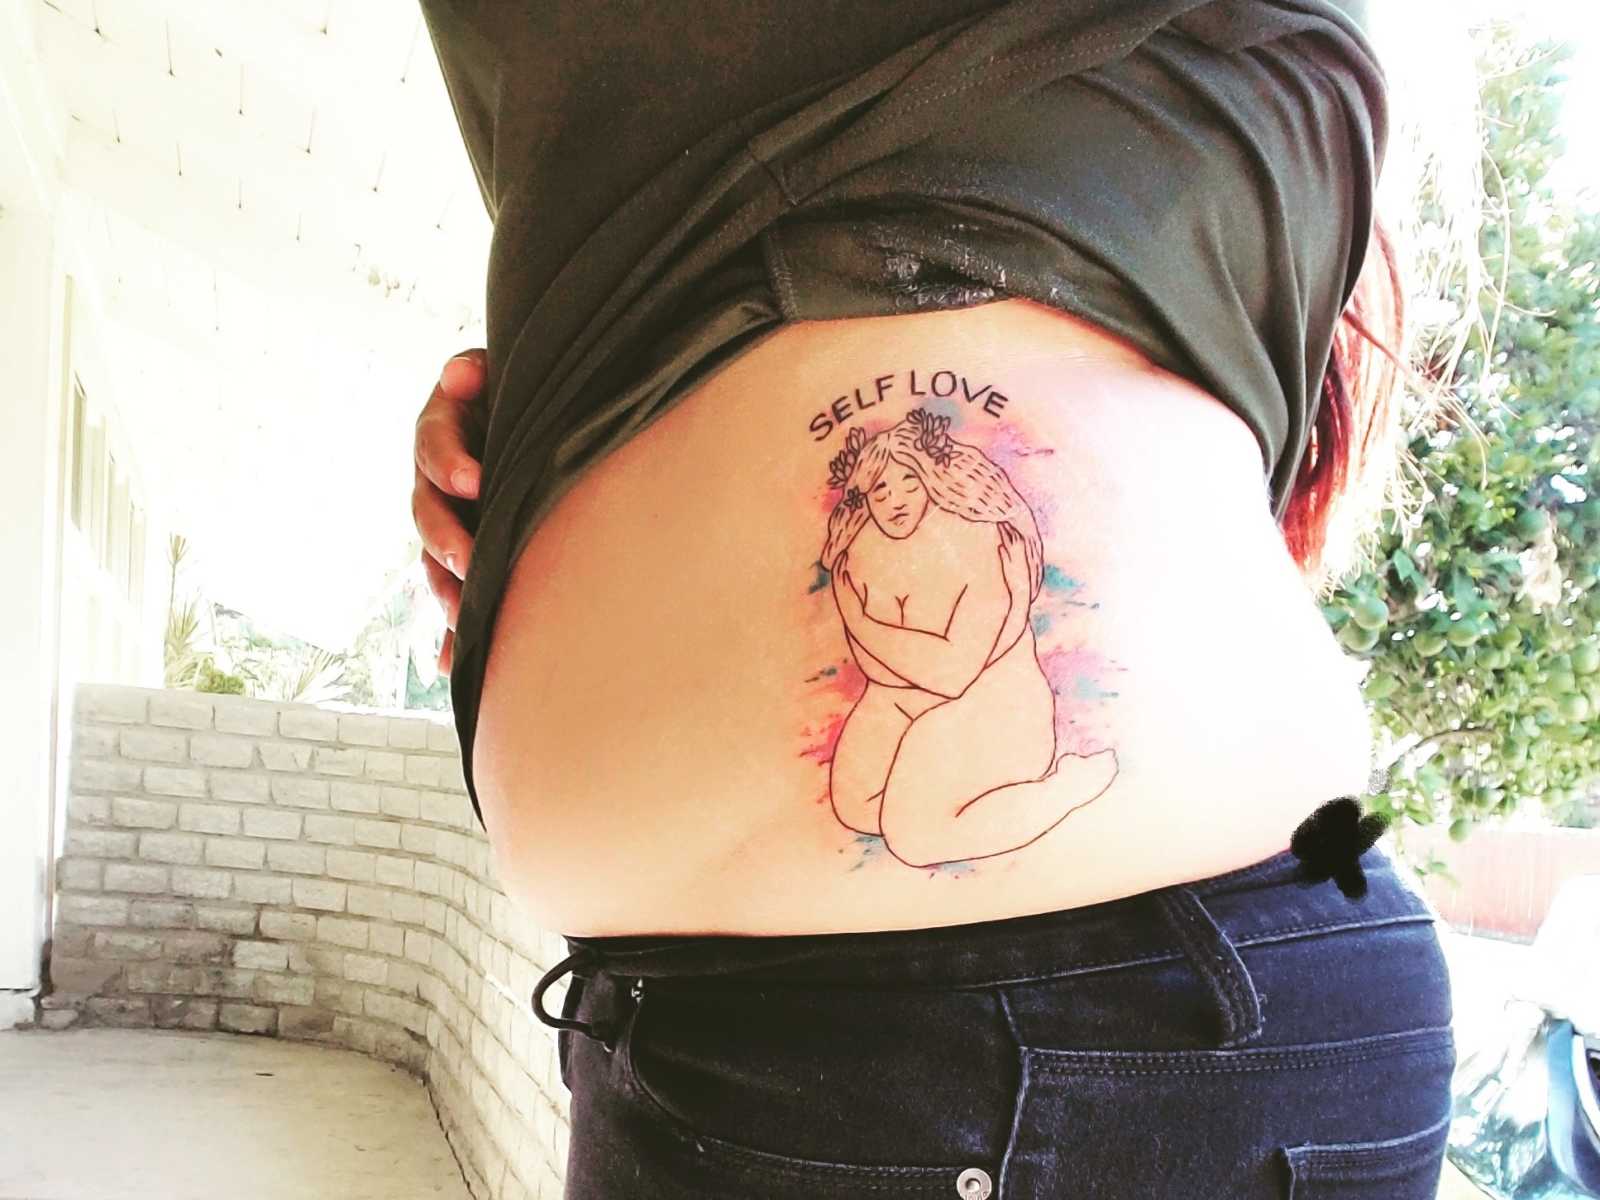 picture of woman's side with tattoo of woman sitting and holding her breasts with words "self love" arching over it